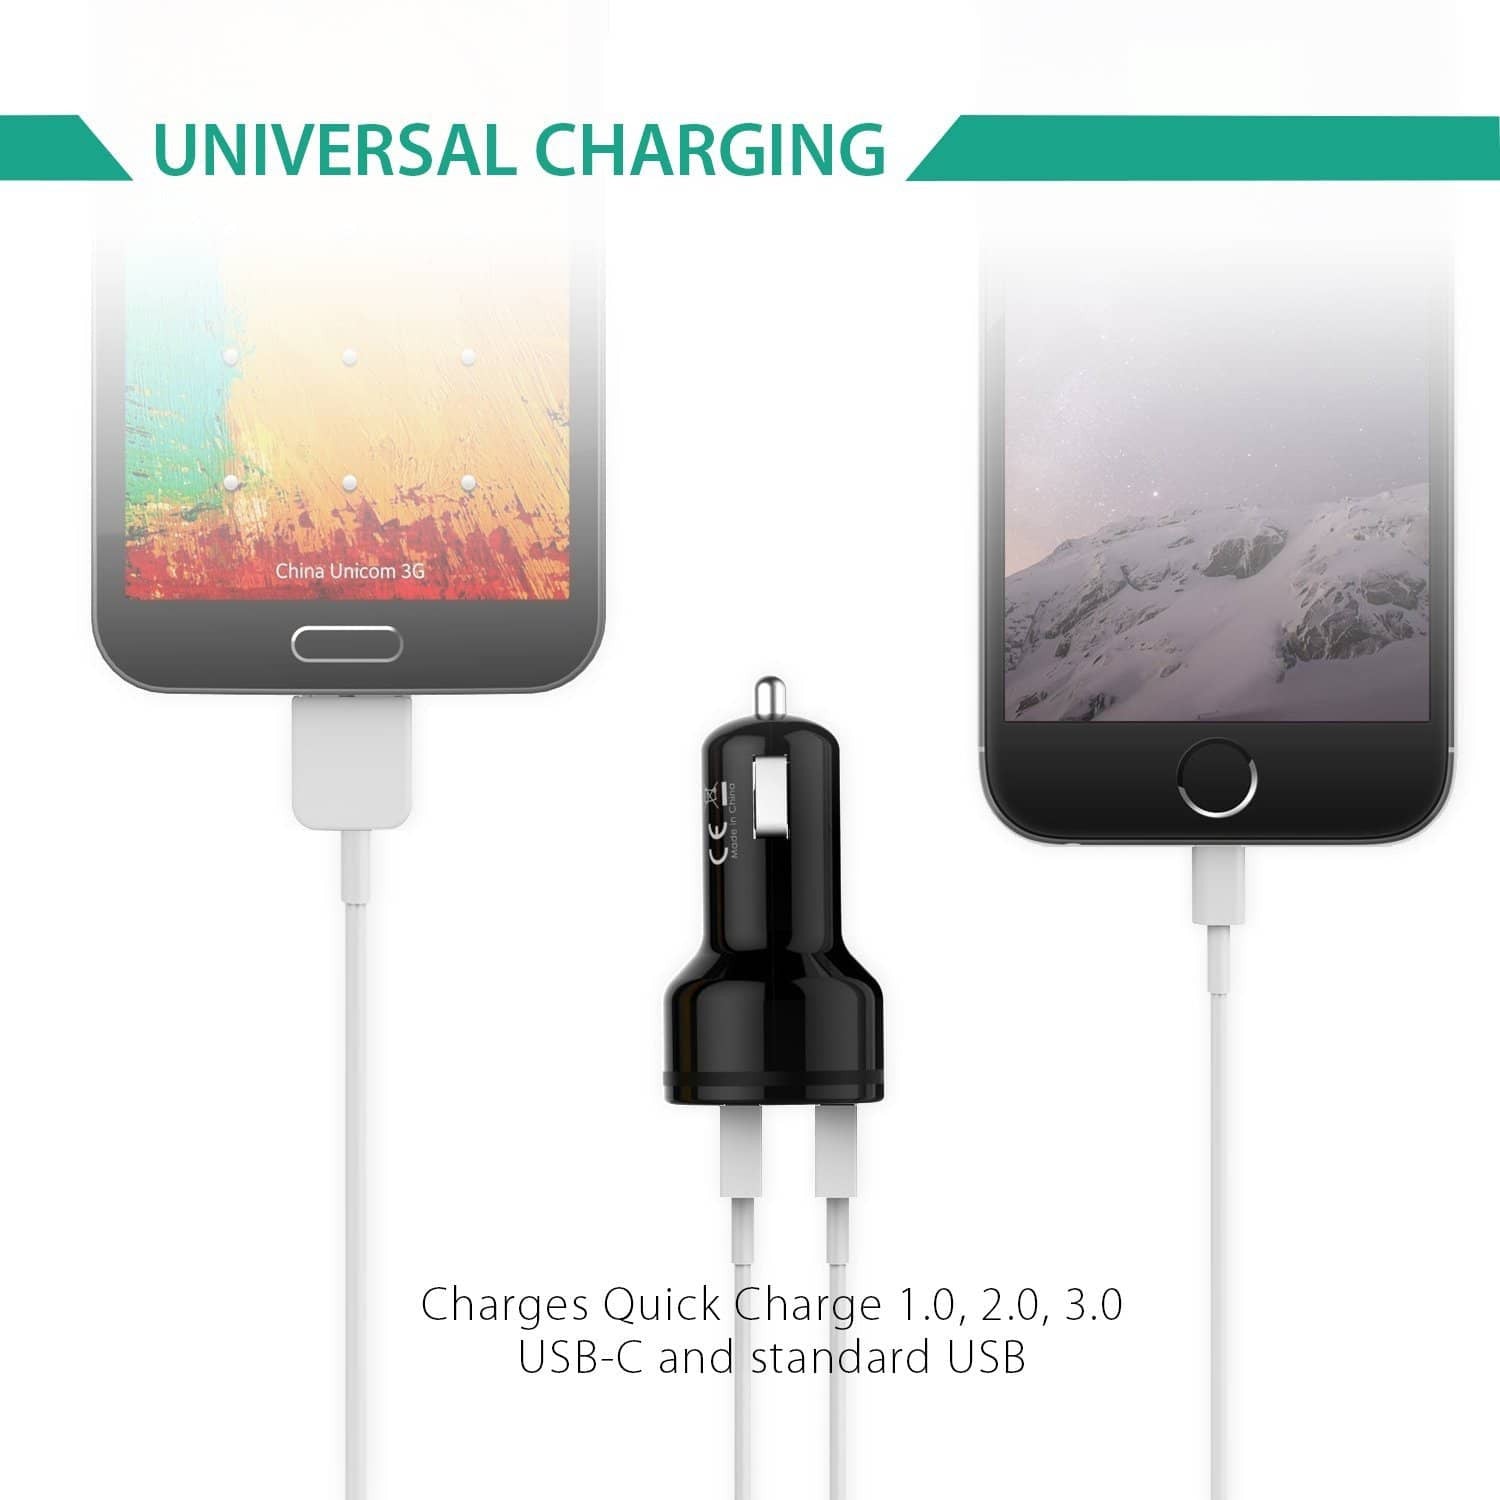 AUKEY CC-T8 36W Dual Port Qualcomm Quick Charge 3.0 Car Charger - Aukey Malaysia Official Store